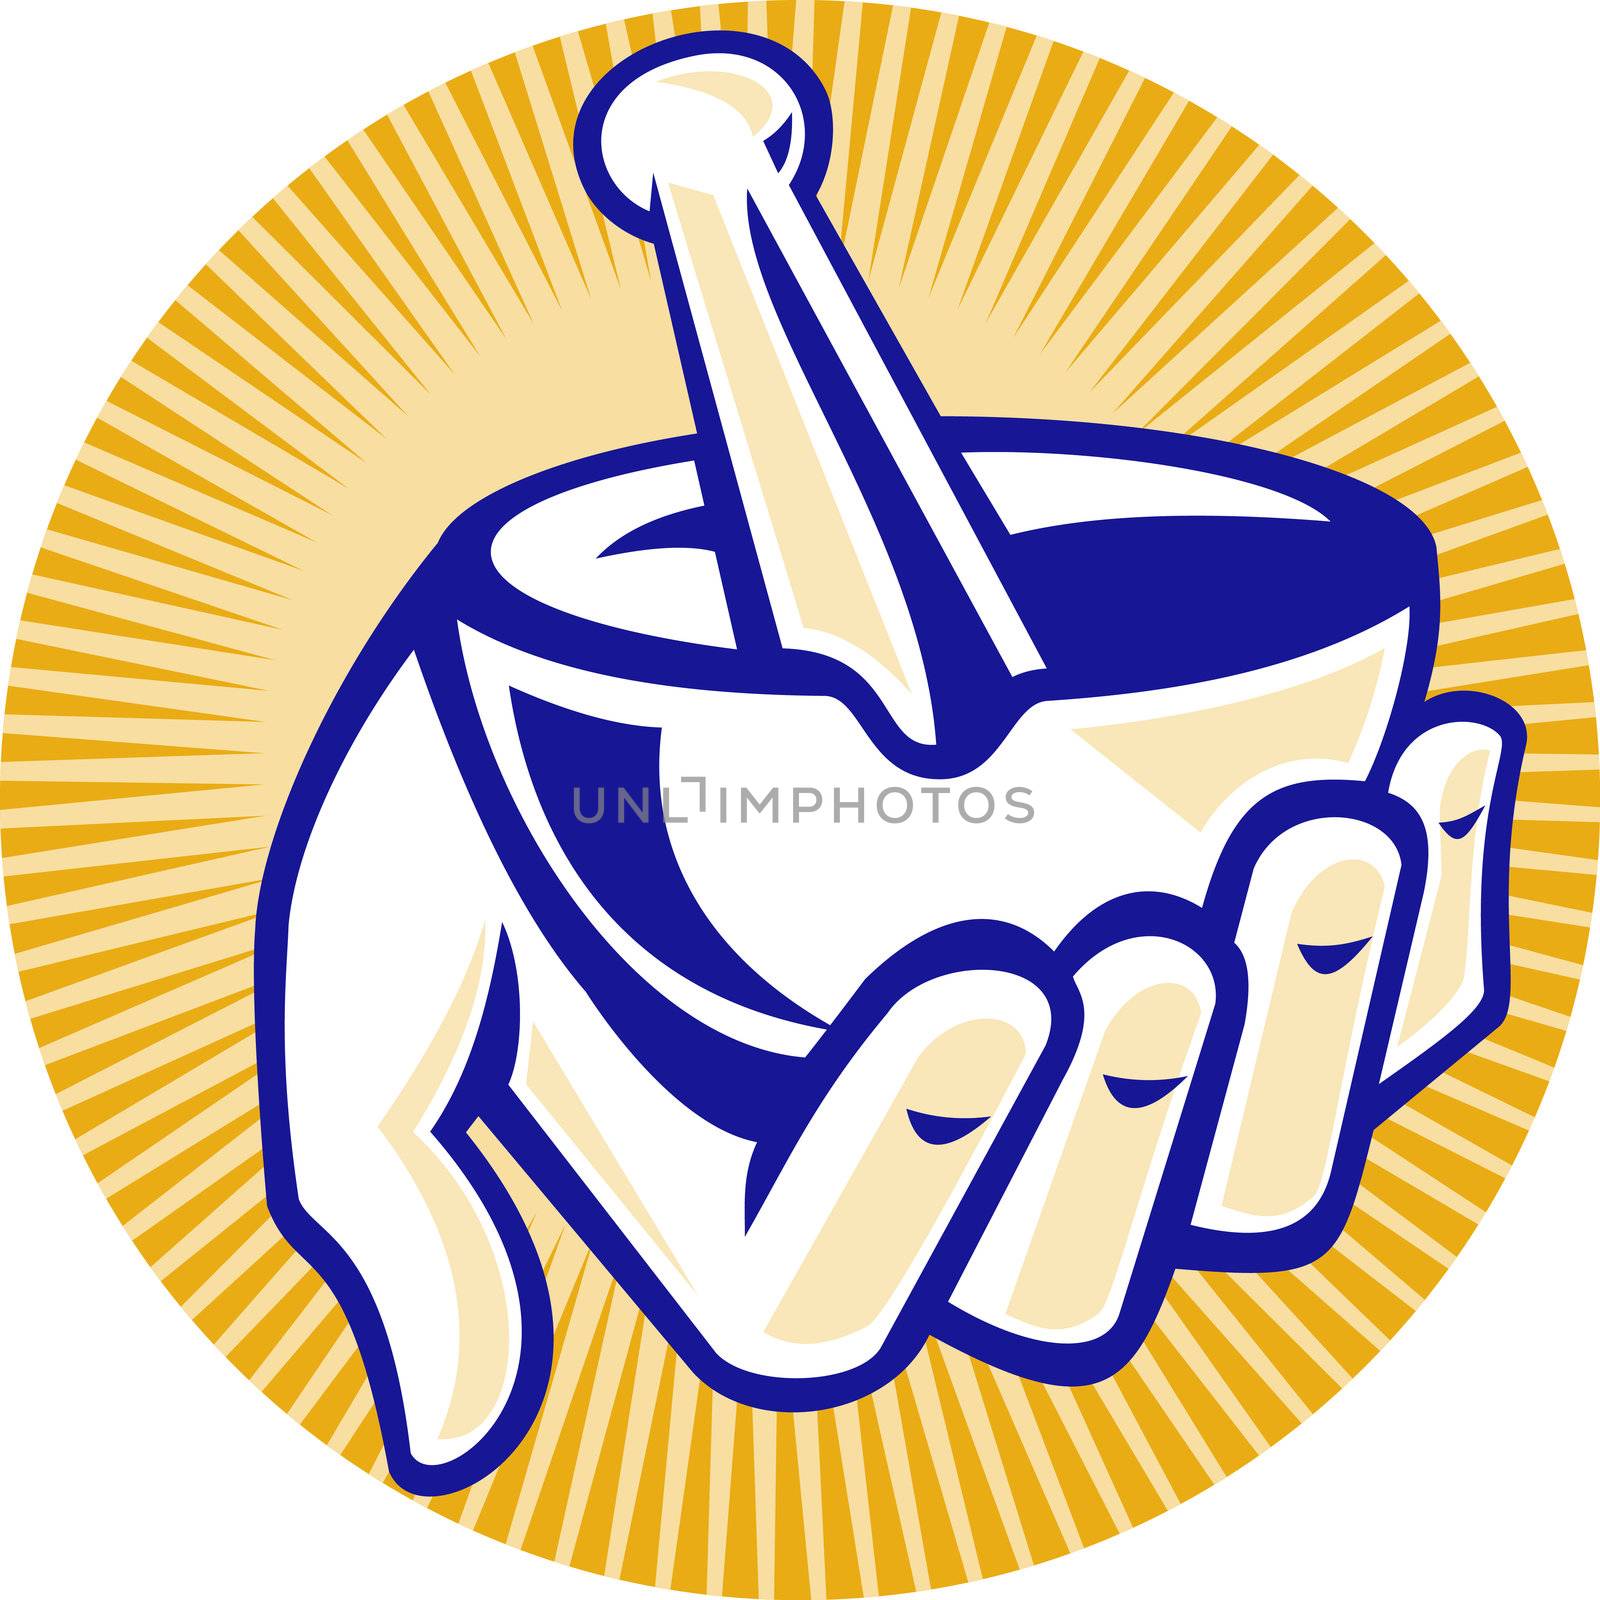 illustration of a pharmacist hand holding mortar and pestle set inside circle with sunburst done in retro style.
